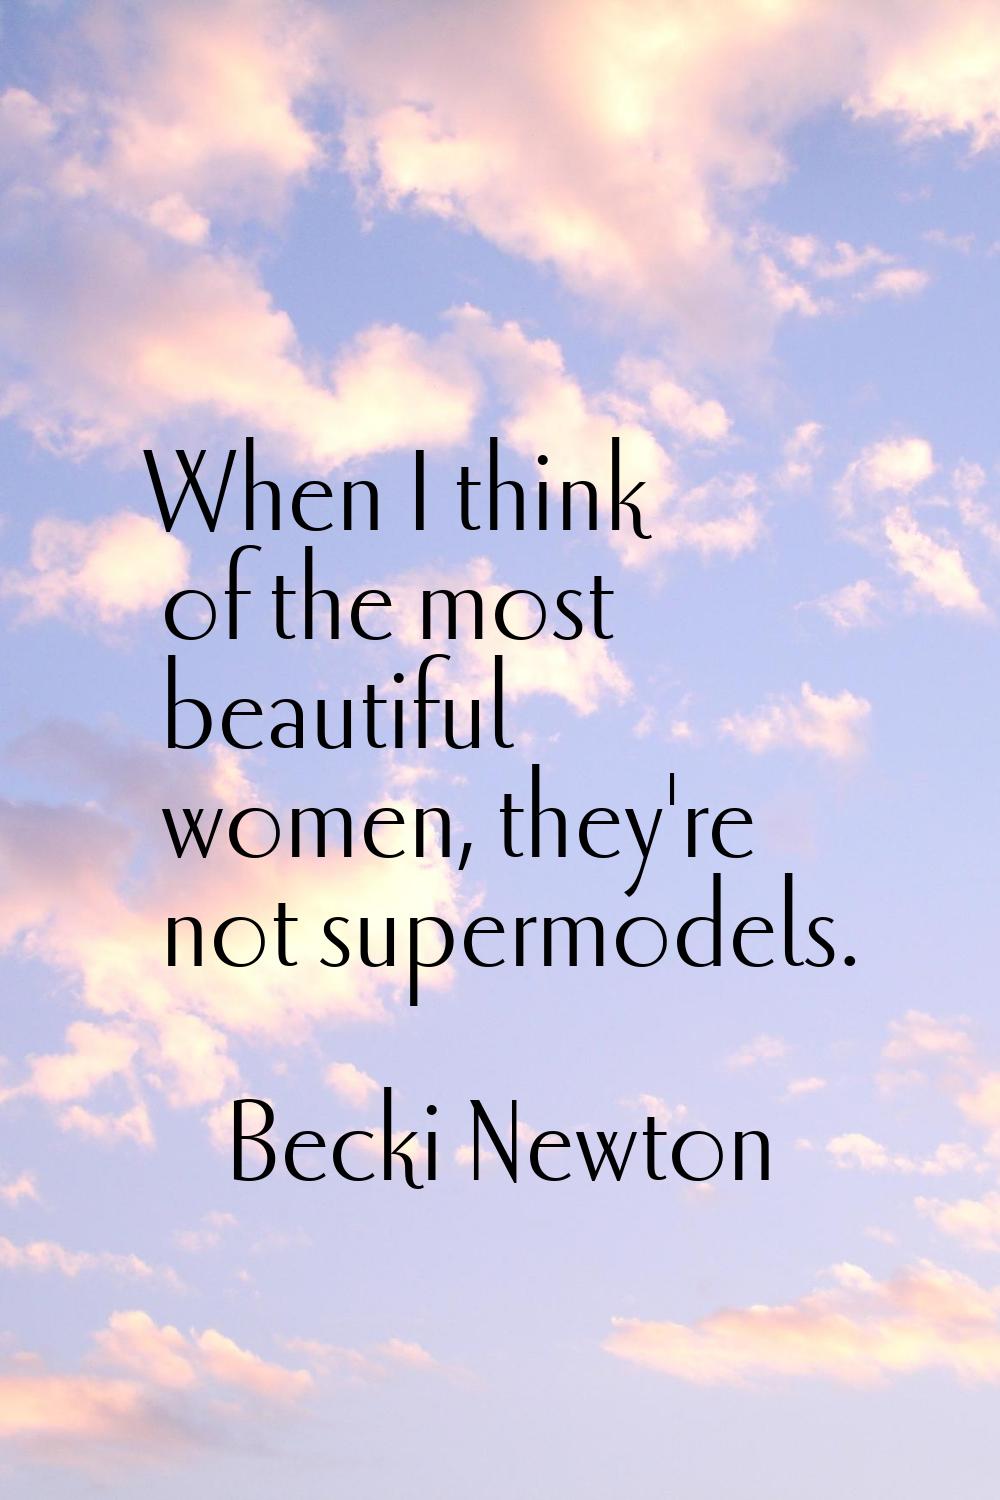 When I think of the most beautiful women, they're not supermodels.